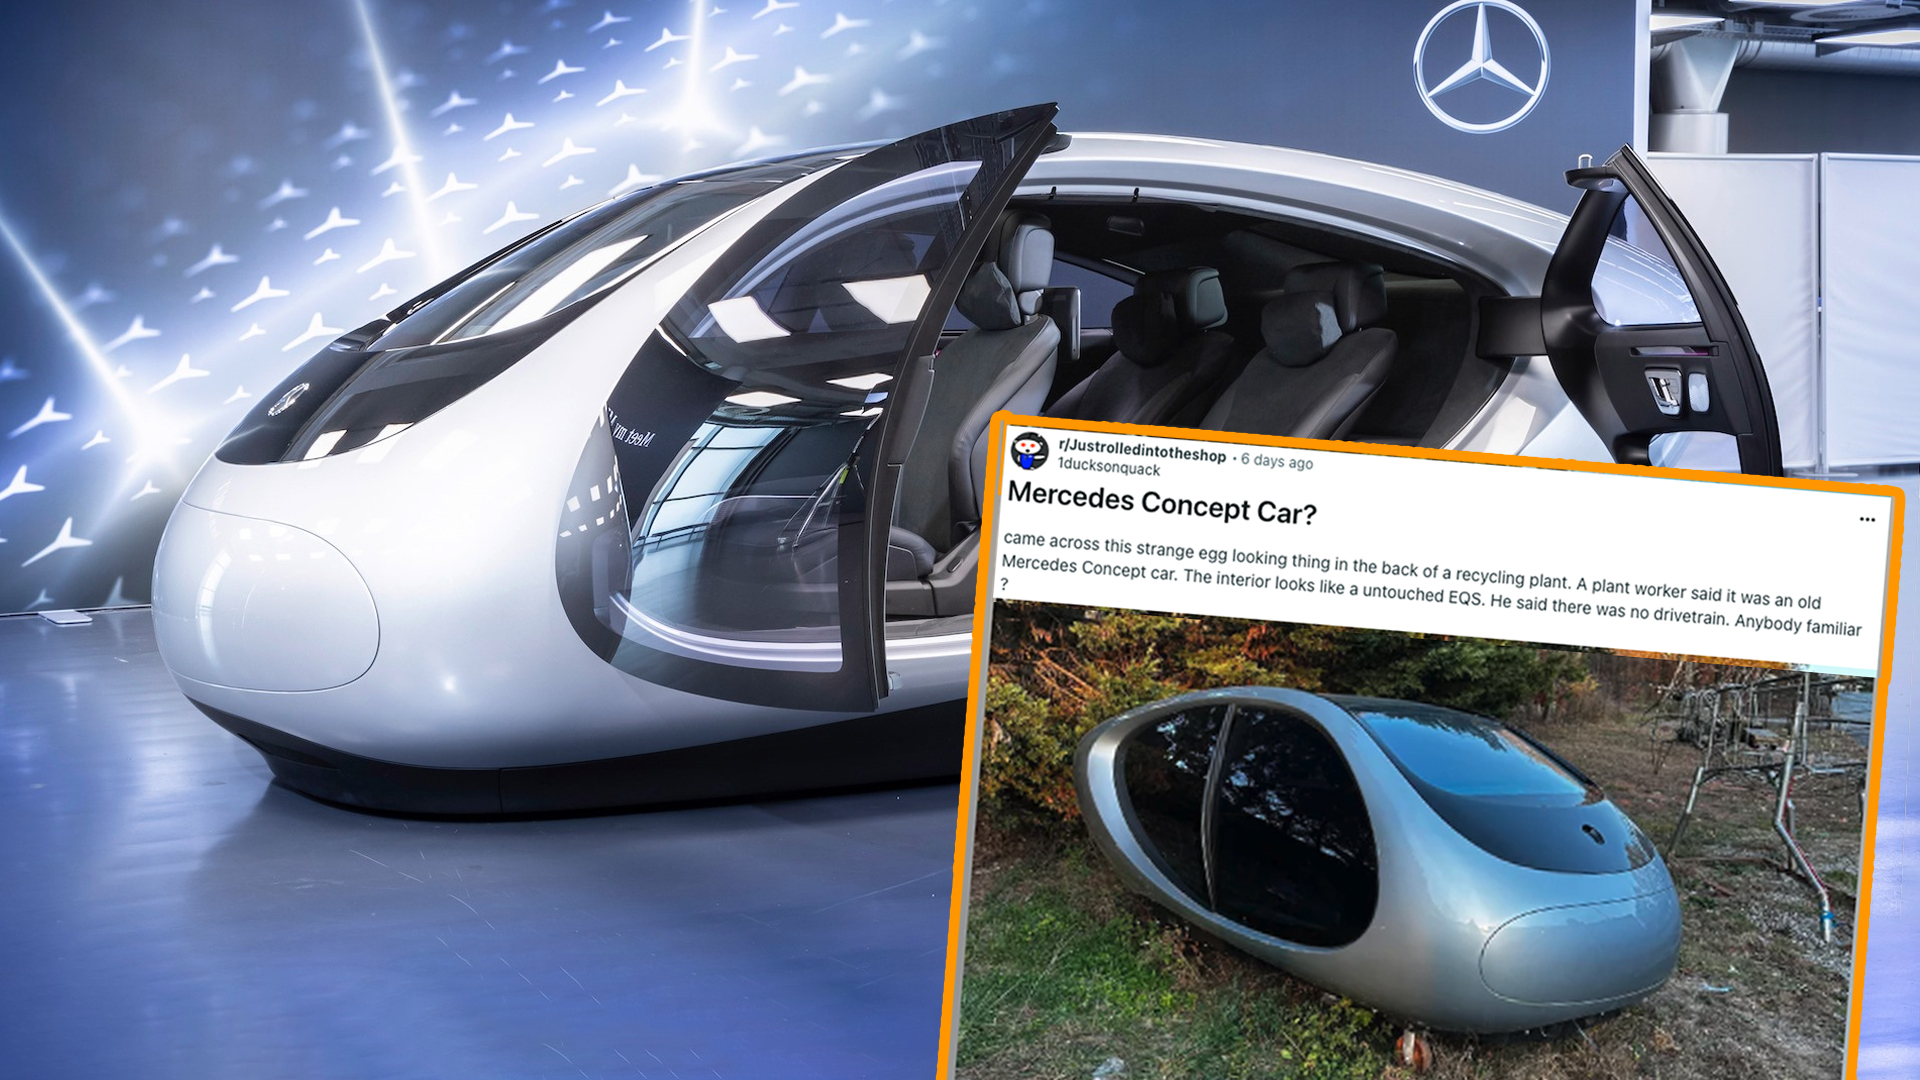 Who’s Gonna Rescue This Abandoned Mercedes Concept Techno-Egg?